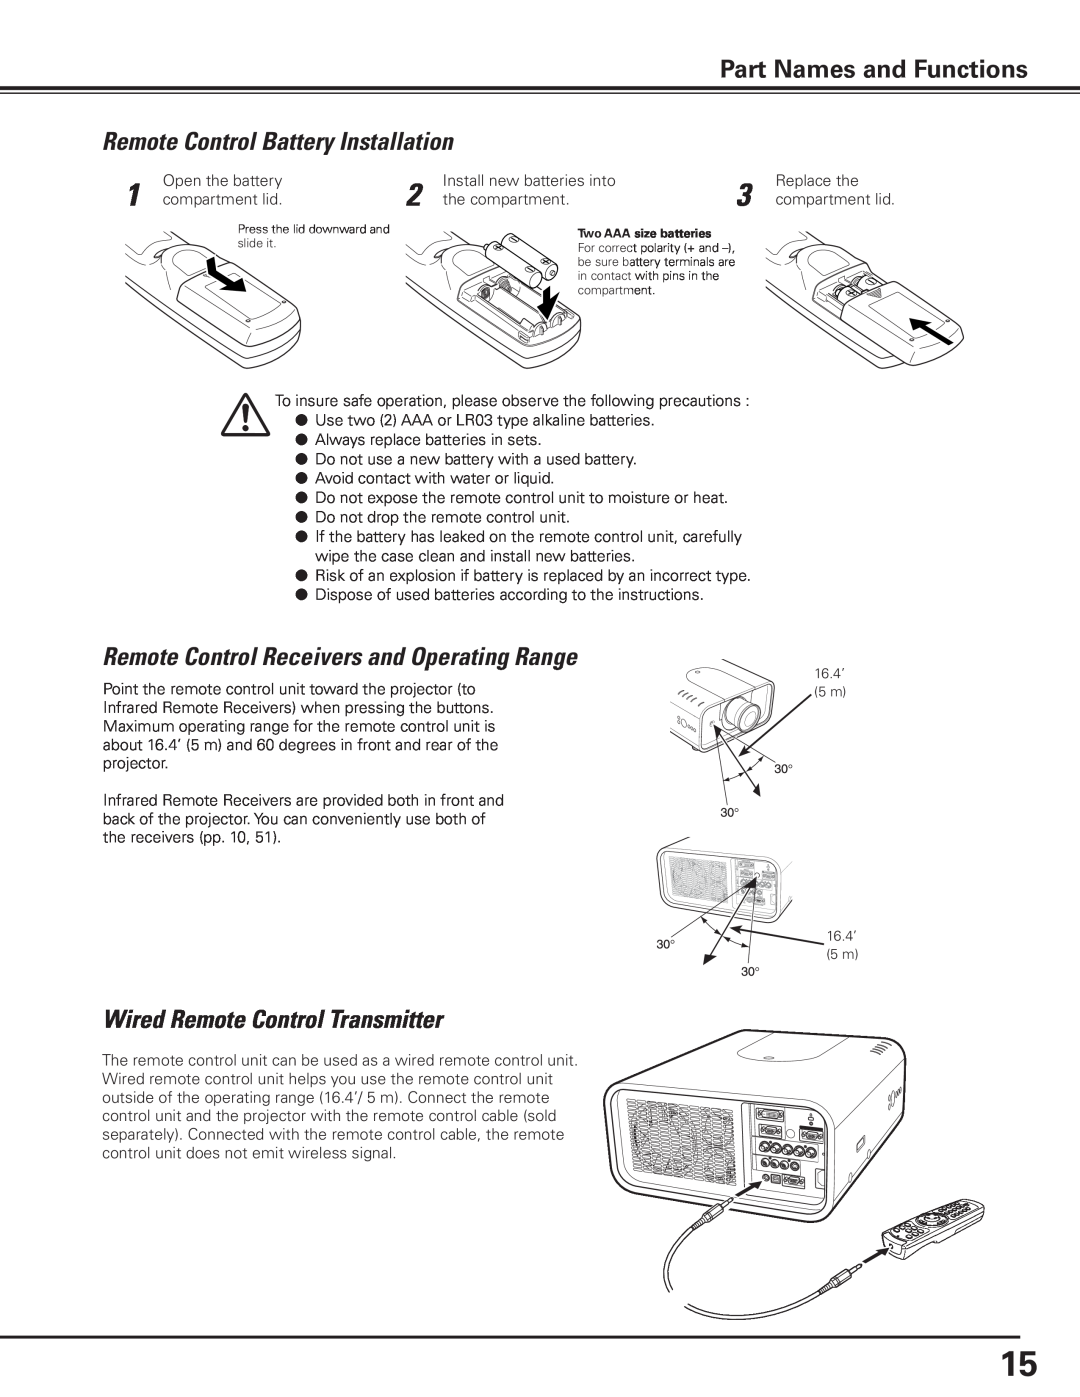 Canon 7585 Remote Control Battery Installation, Remote Control Receivers and Operating Range, Part Names and Functions 